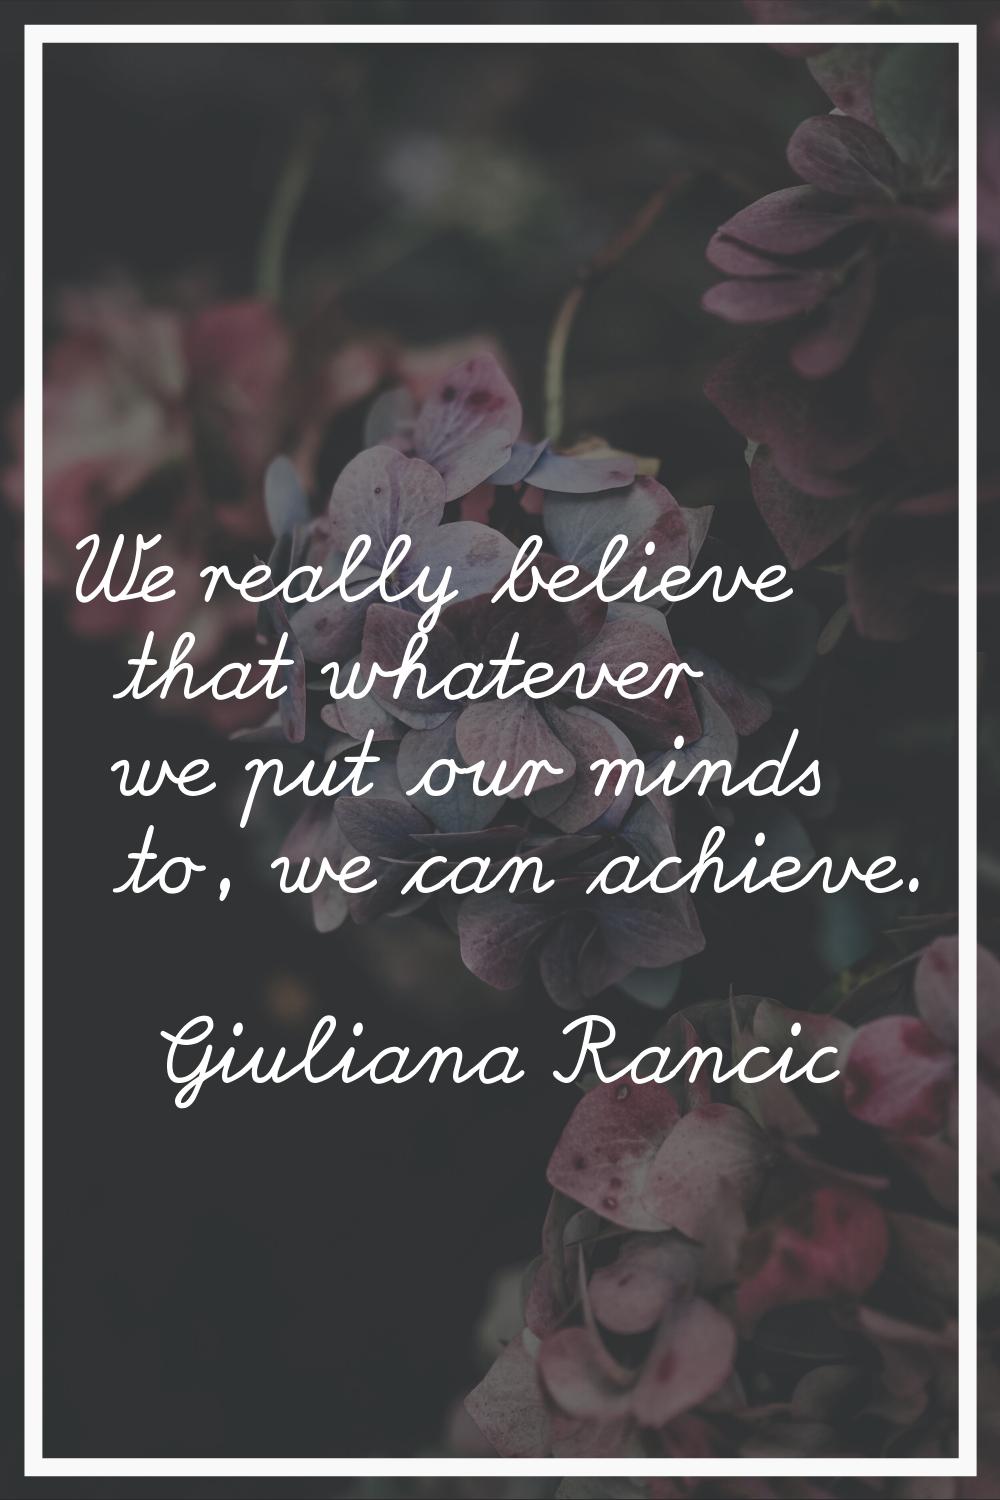 We really believe that whatever we put our minds to, we can achieve.